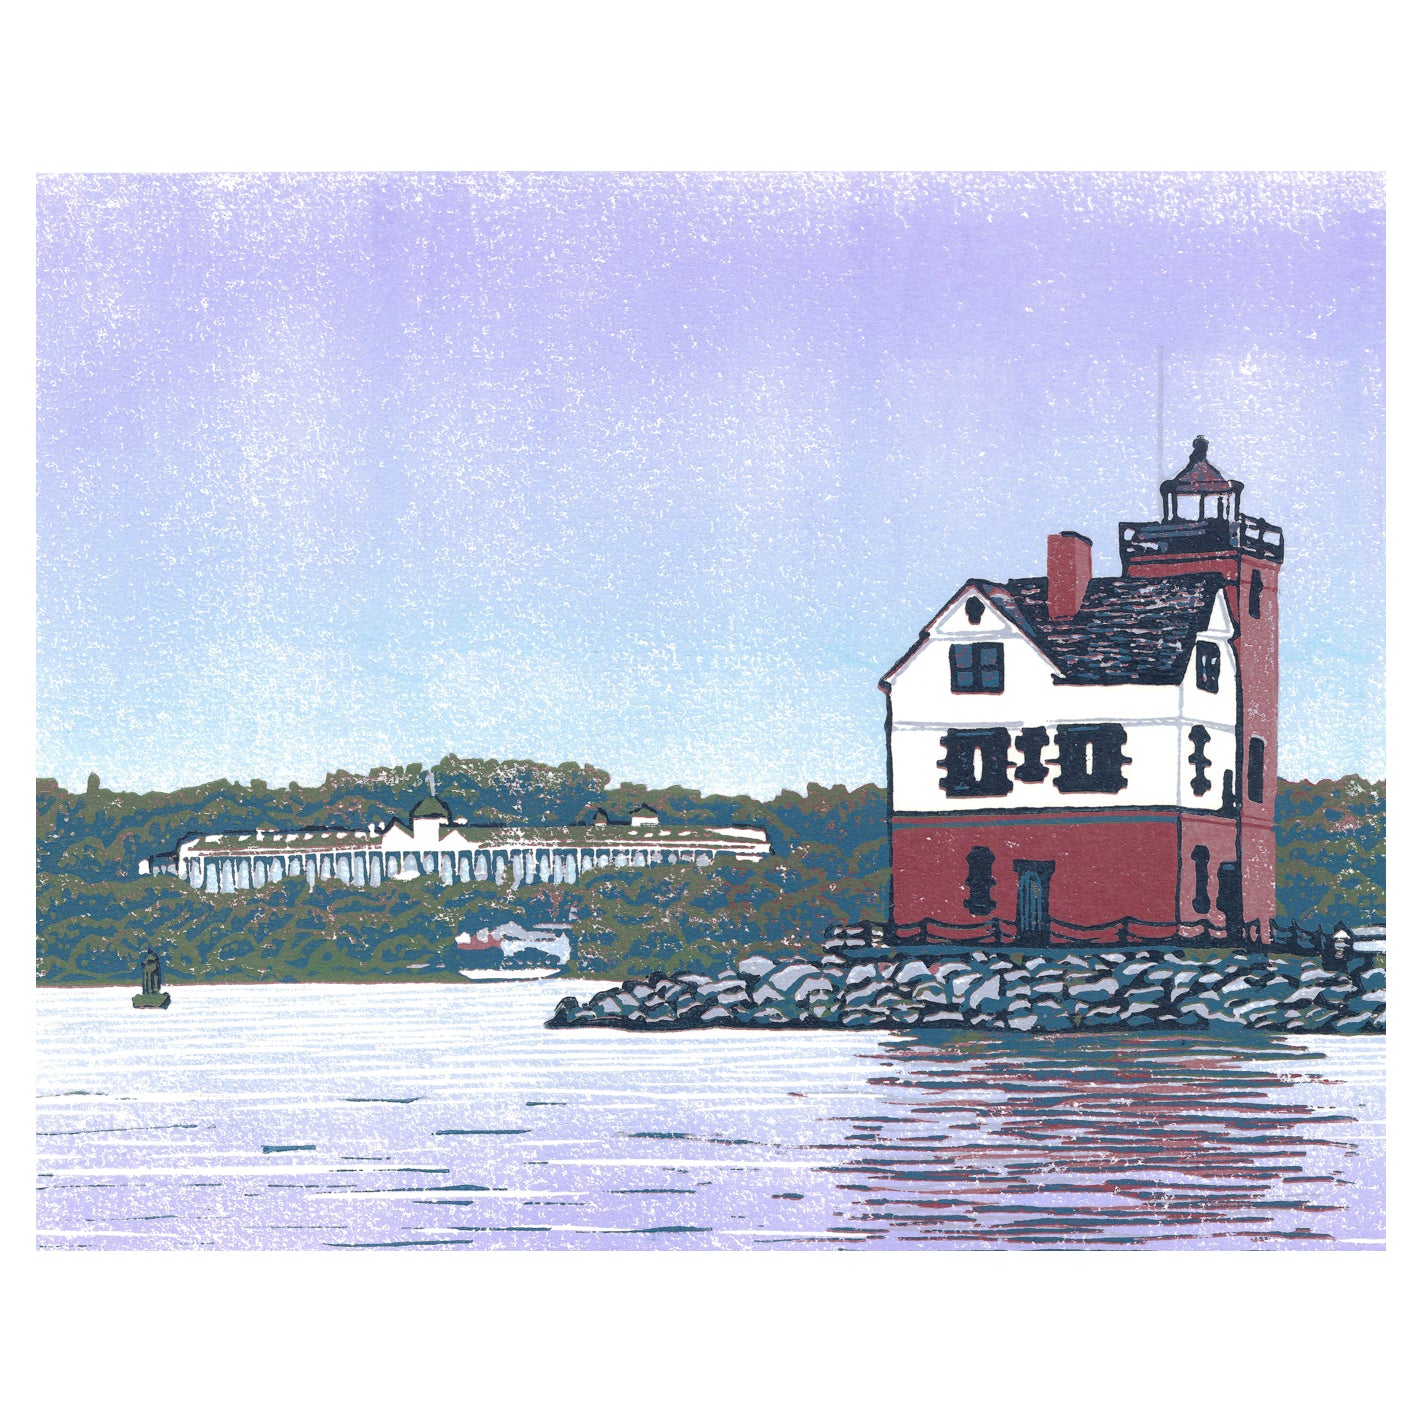 Mackinac Island art created by Natalia Wohletz of Peninsula Prints, Mackinac Island.  Rounding the Island is an 8-color reduction block print featuring a unique view of Round Island Lighthouse with Grand Hotel in the background.